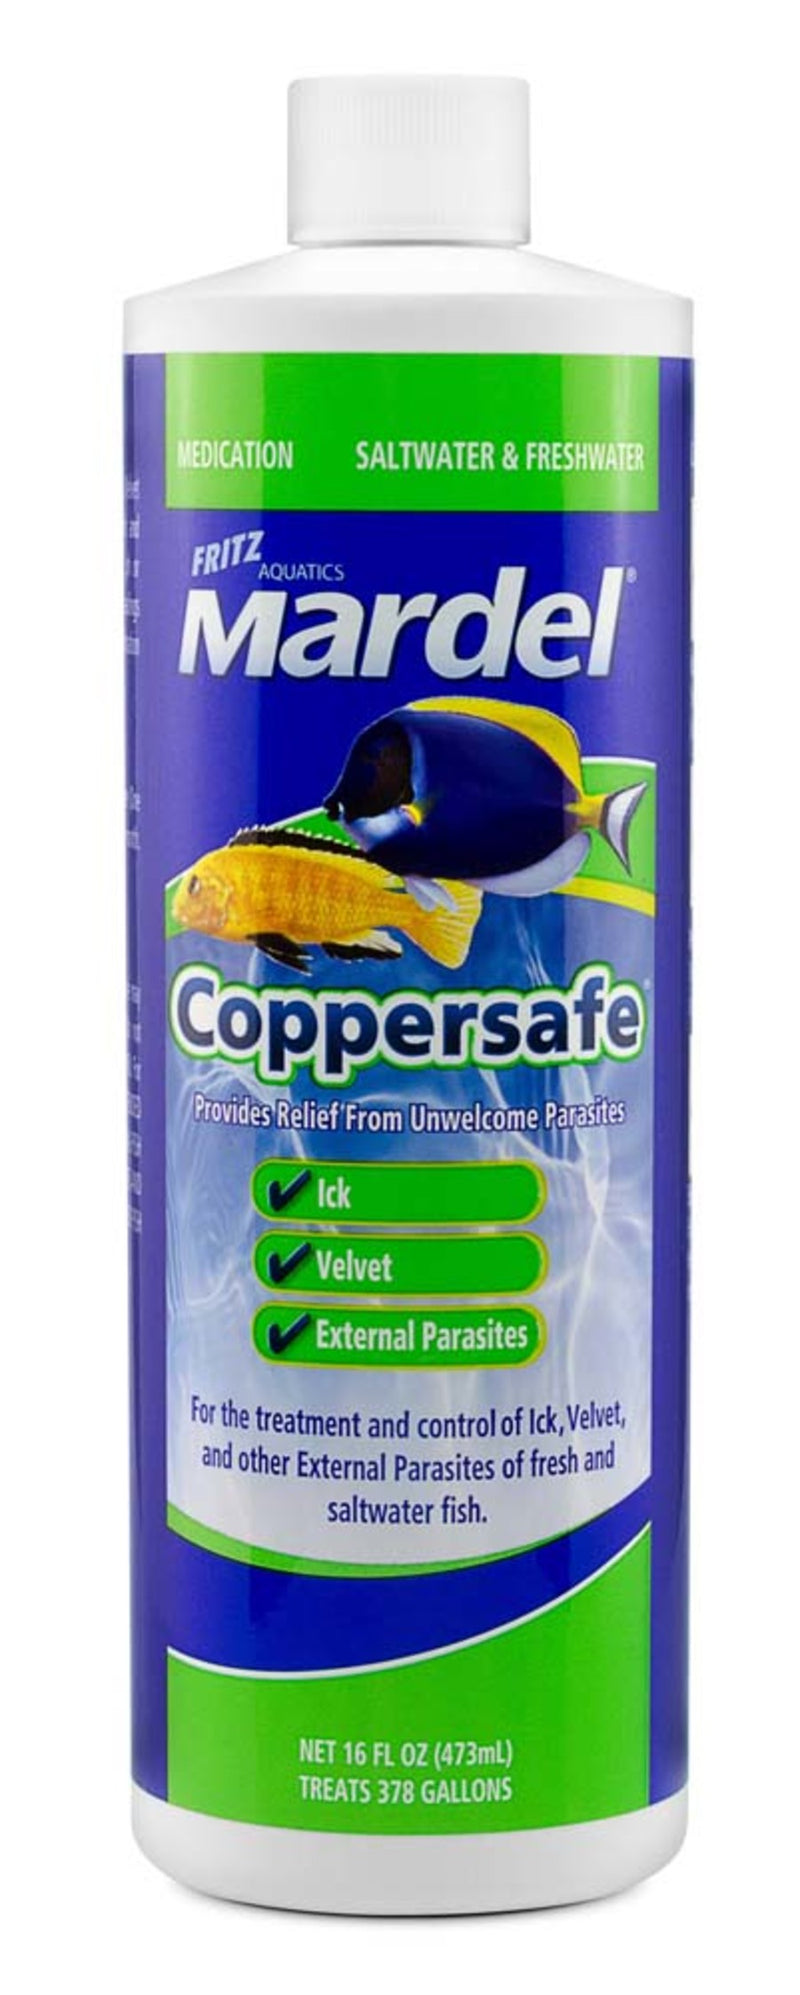 Mardel Coppersafe Chelated Copper Treatment